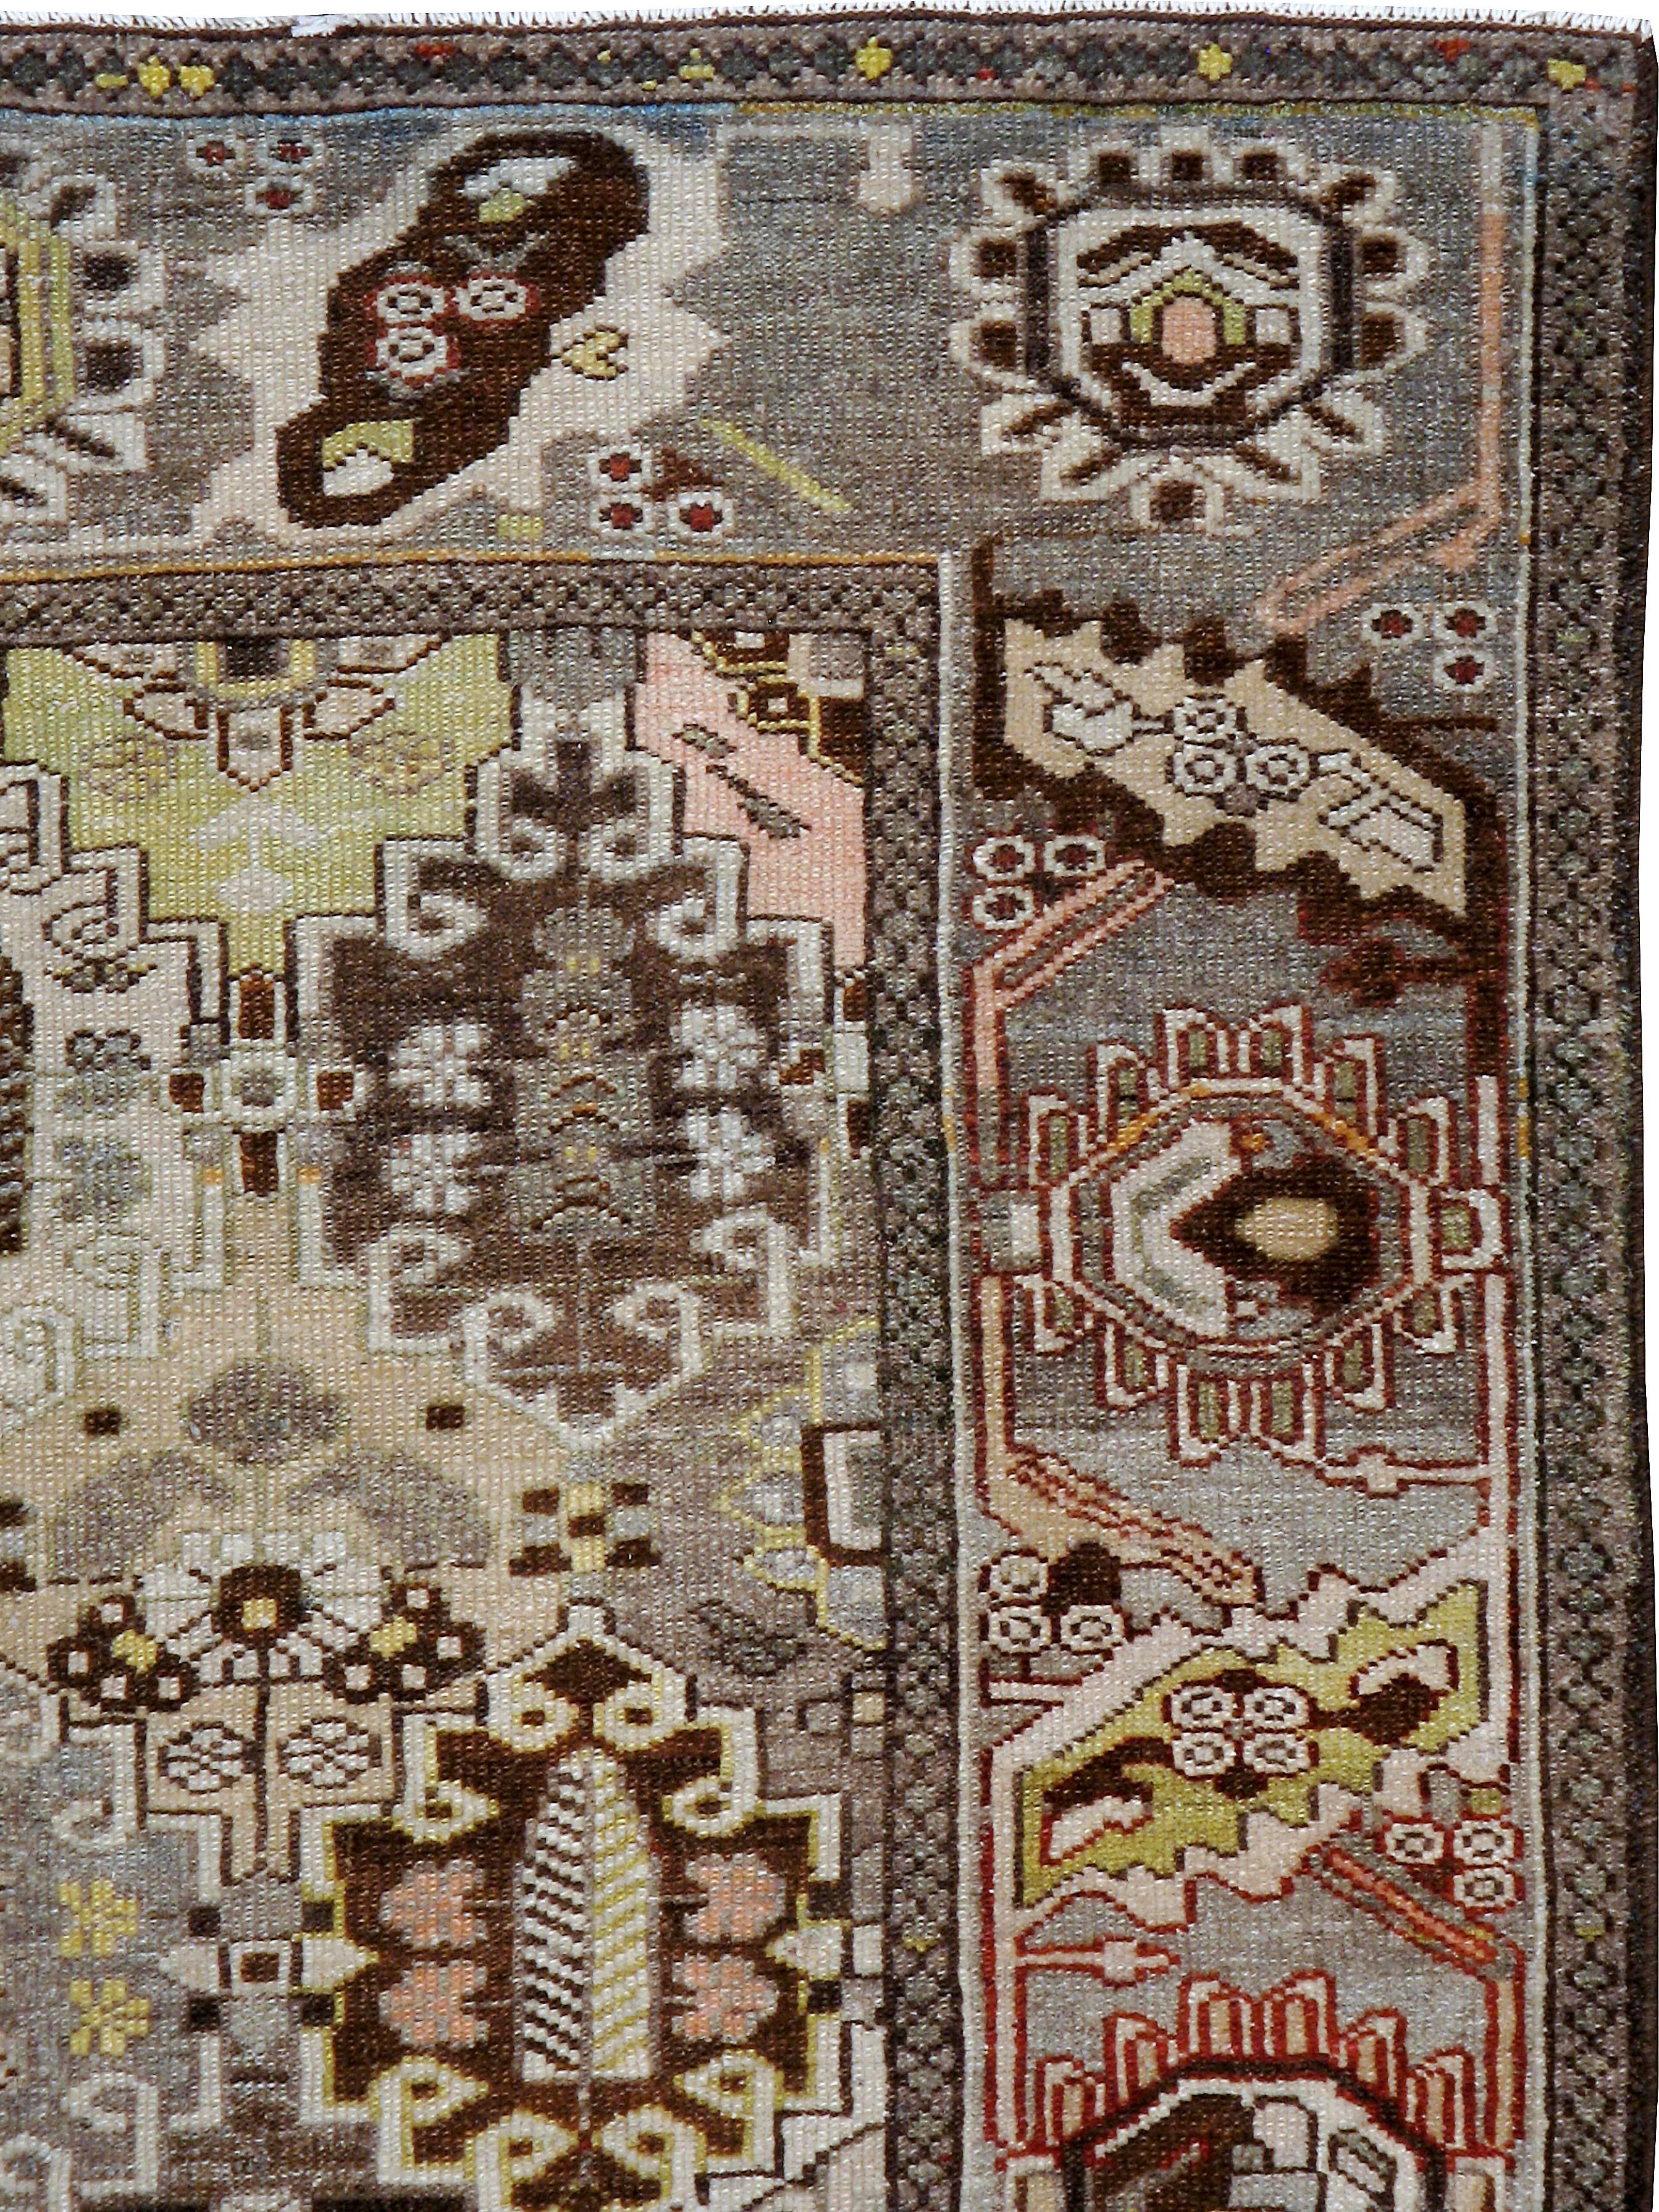 An antique Persian Bakhtiari carpet from the first quarter of the 20th century.